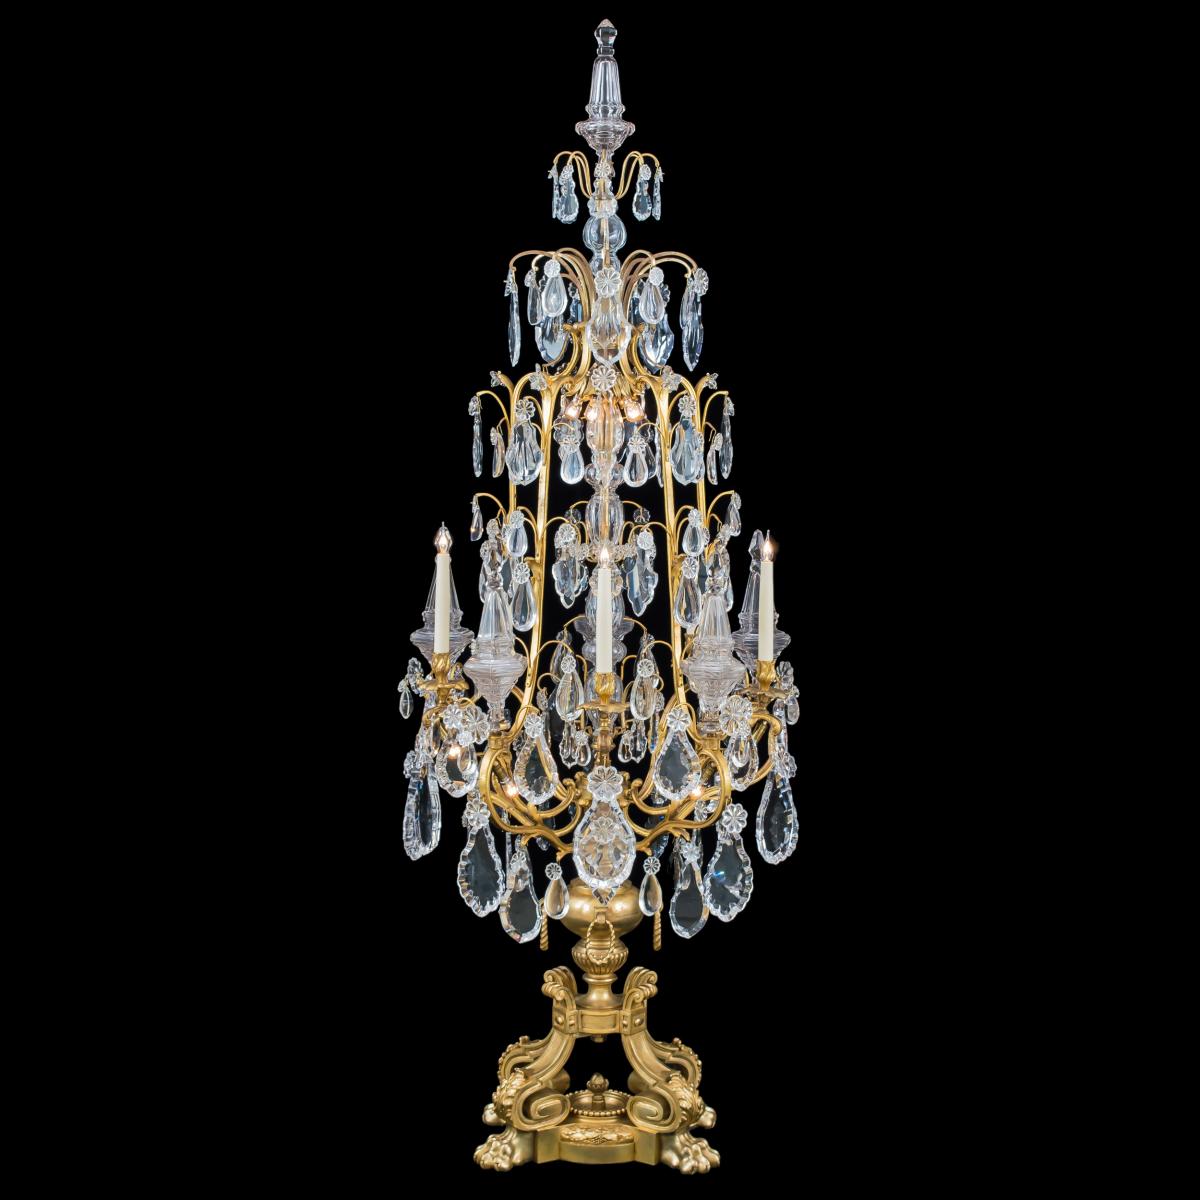 Pair of Louis XV Style Ormolu & Crystal Girandoles Probably by Baccarat